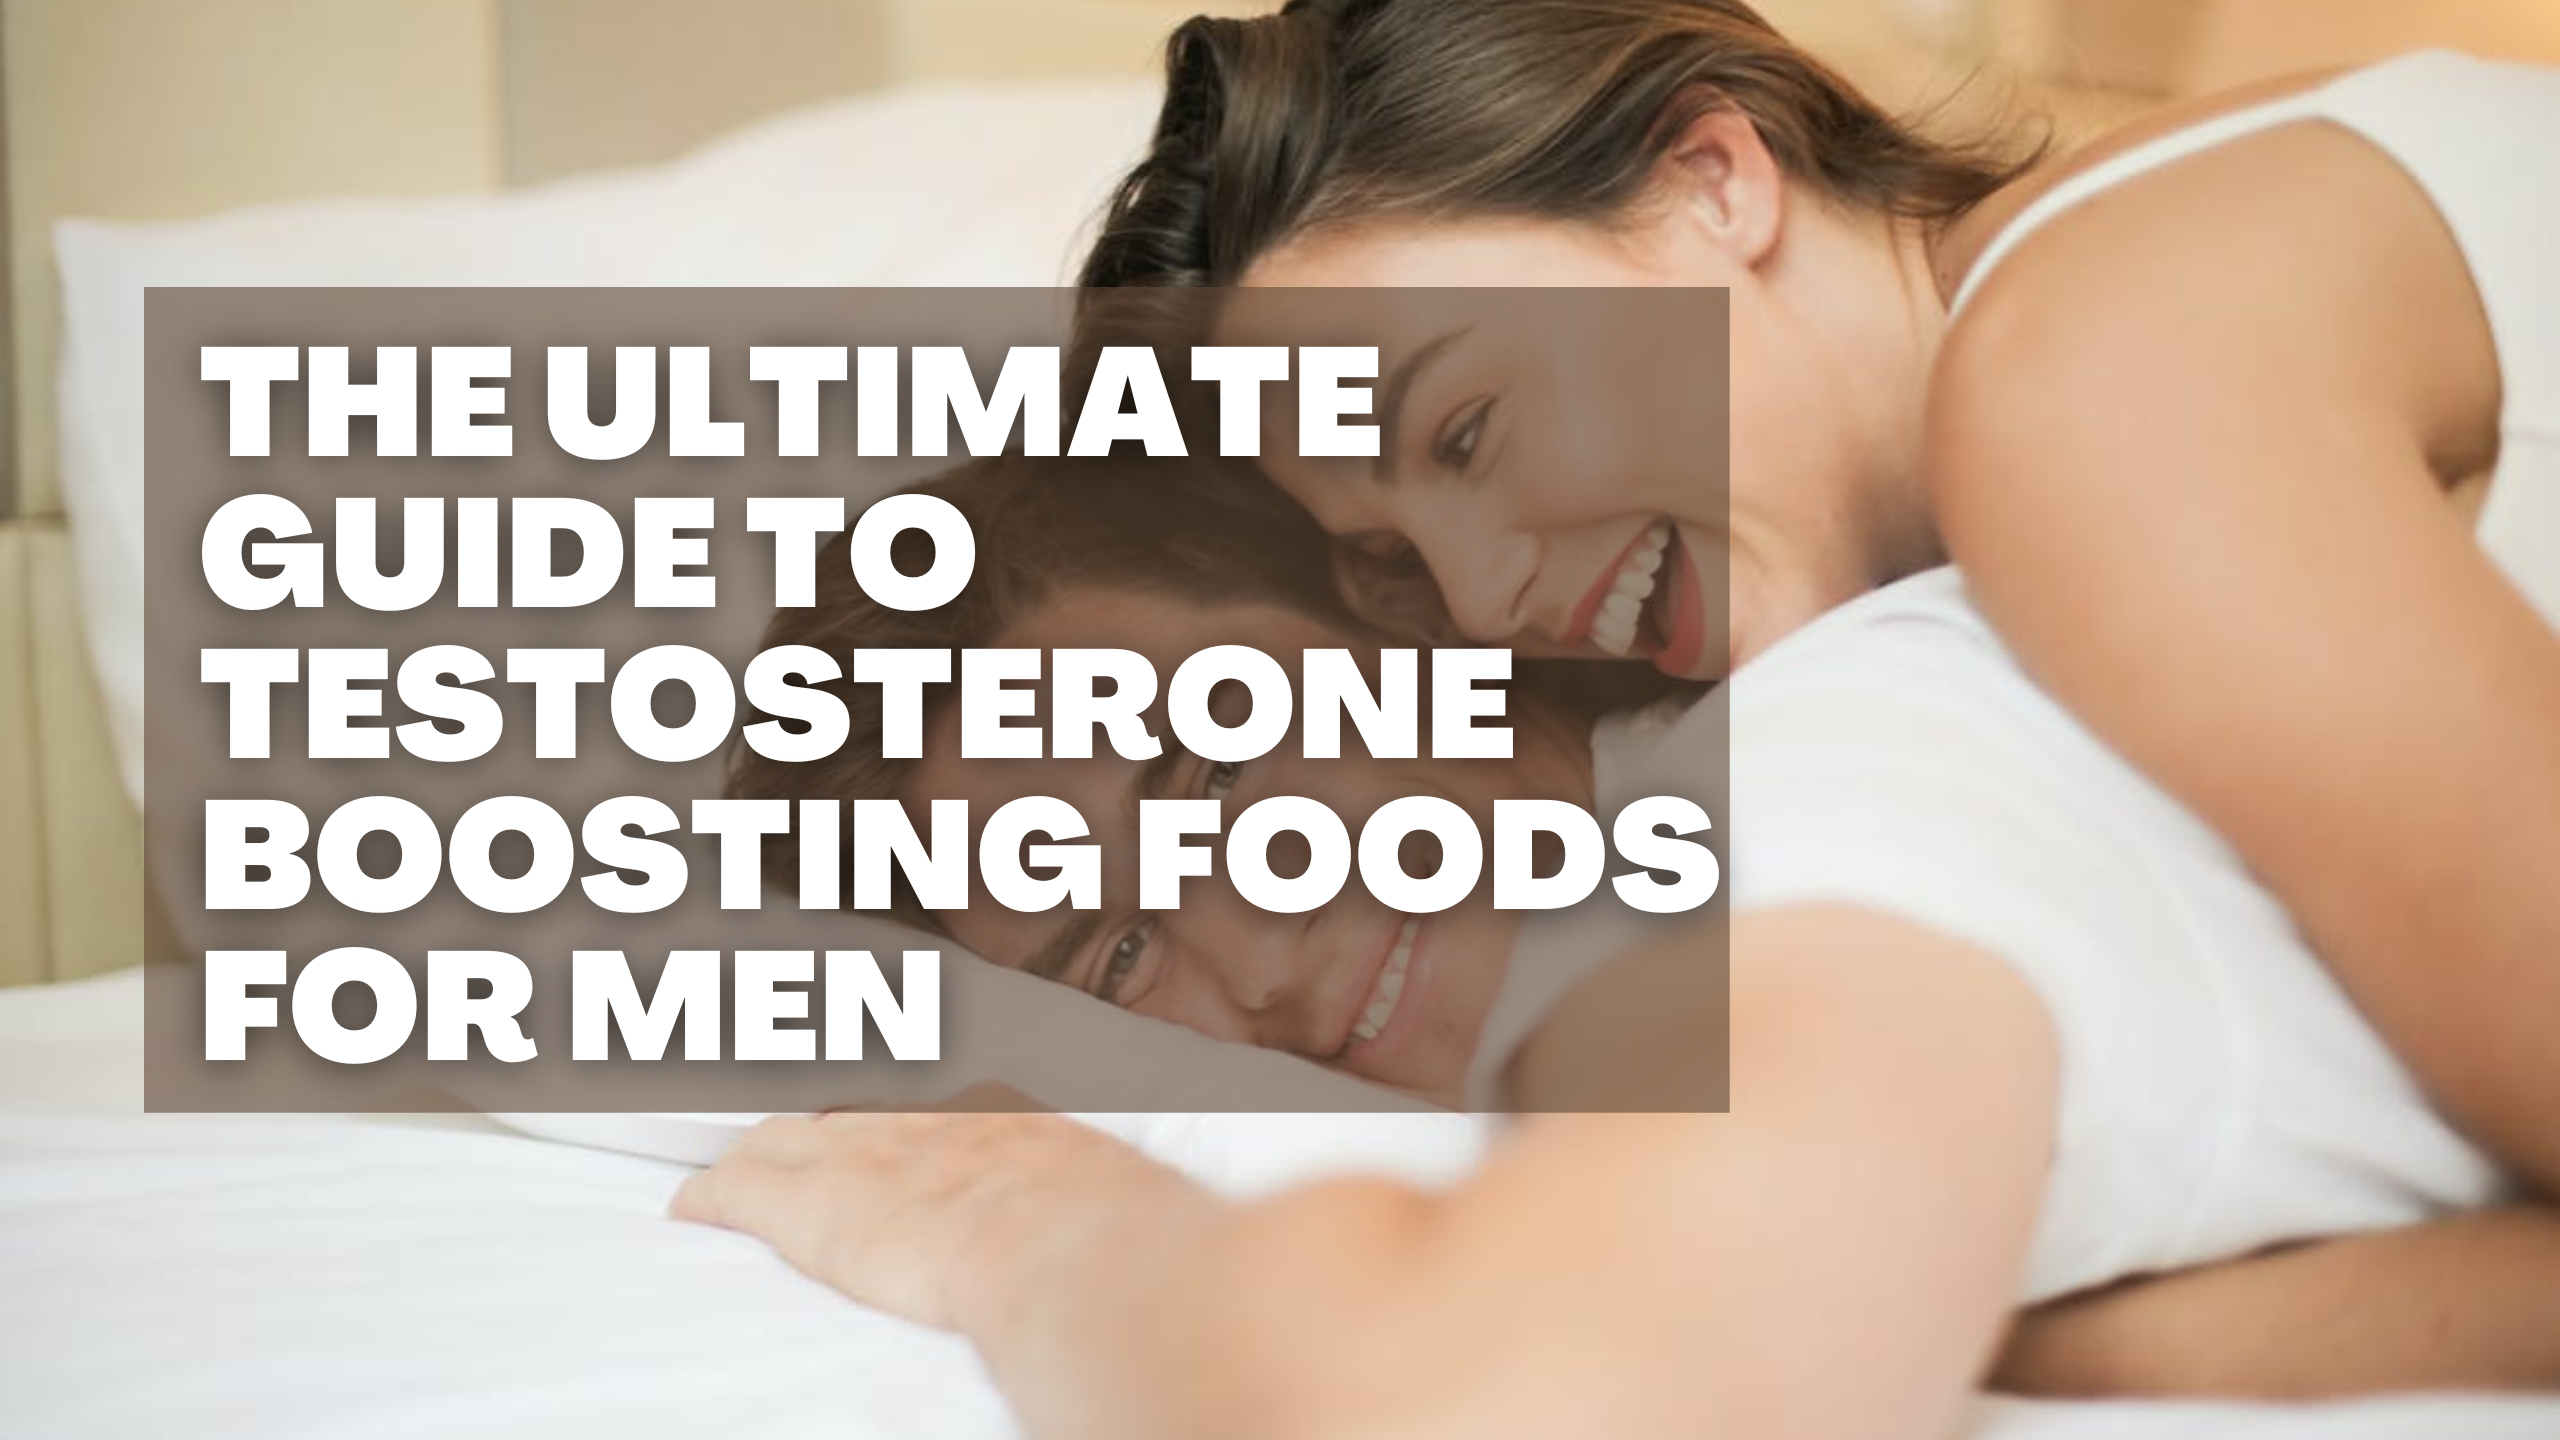 The Ultimate Guide to Testosterone Boosting Foods for Men